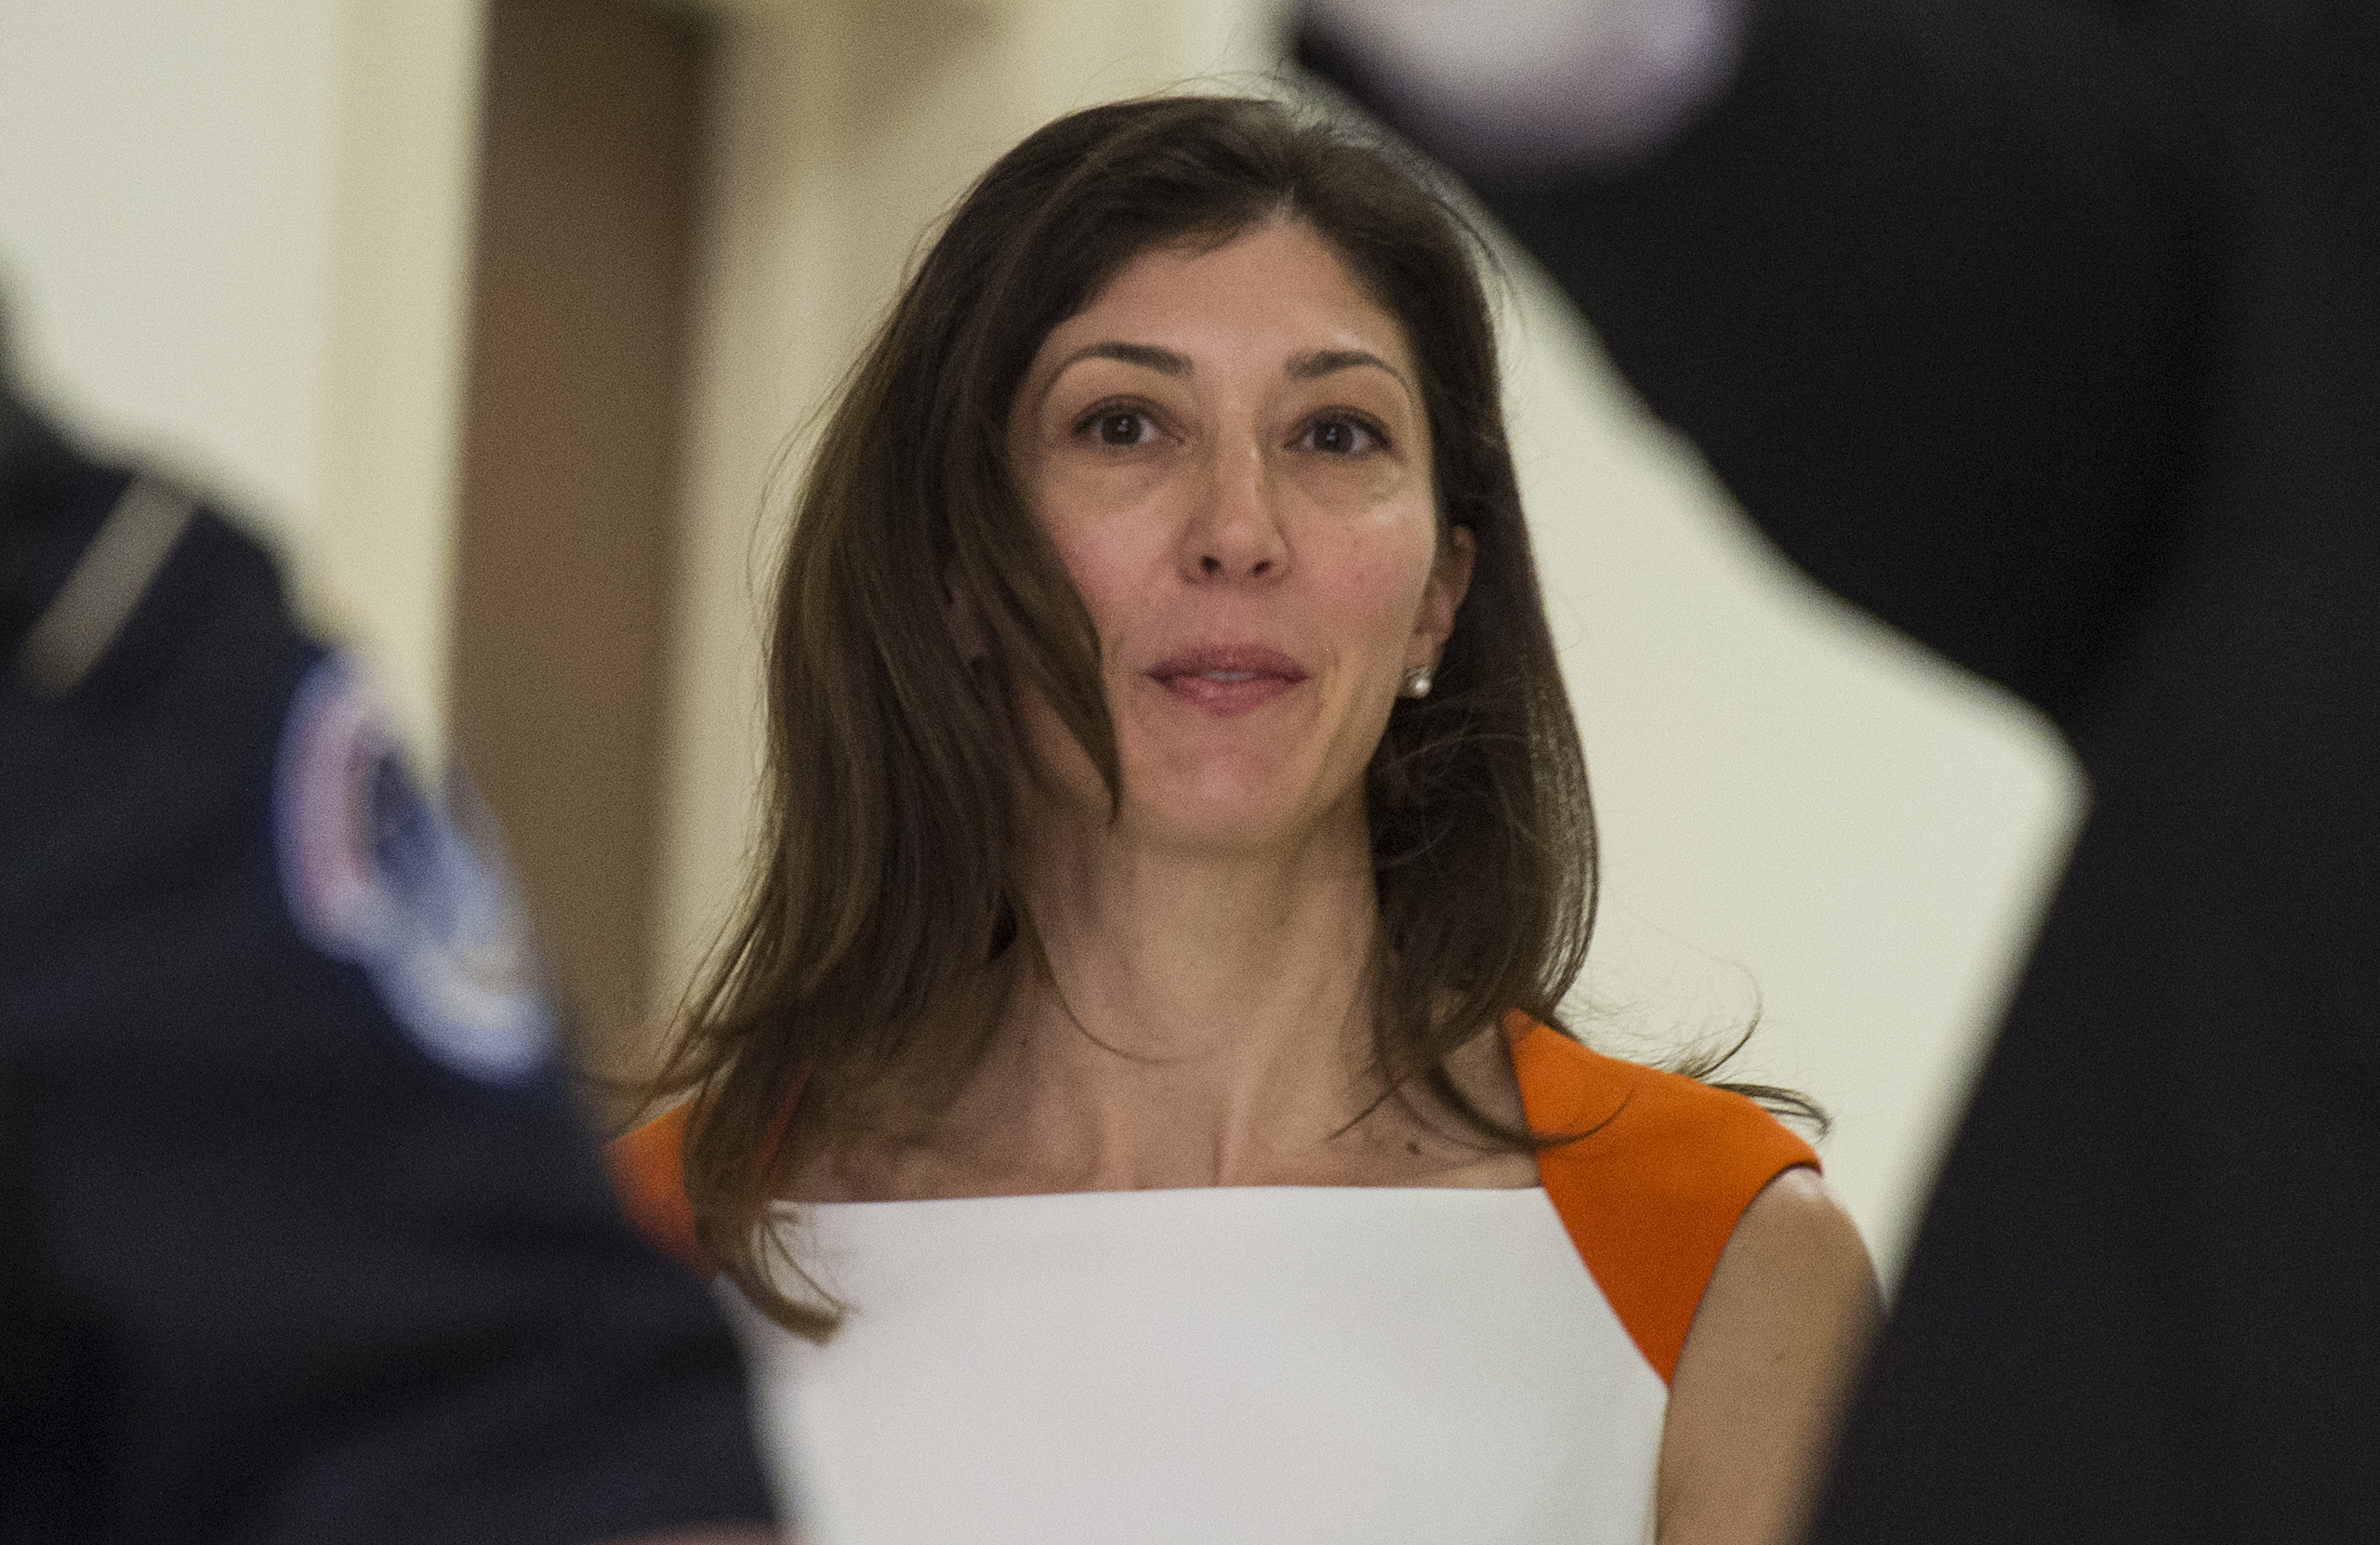 Lisa Page, former legal counsel to former FBI Director Andrew Mc Cabe, arrives on Capitol Hill July 16, 2018 arrives to speak before the House Judiciary and Oversight Committee on Capitol Hill in Washington, DC. - Republicans accuse the pair, Lisa Page and FBI agent Peter Strzok, of deep anti-Trump bias as they helped conduct investigations of both Hillary Clinton and the candidate who would eventually become the US president. (ANDREW CABALLERO-REYNOLDS / AFP via Getty Images)